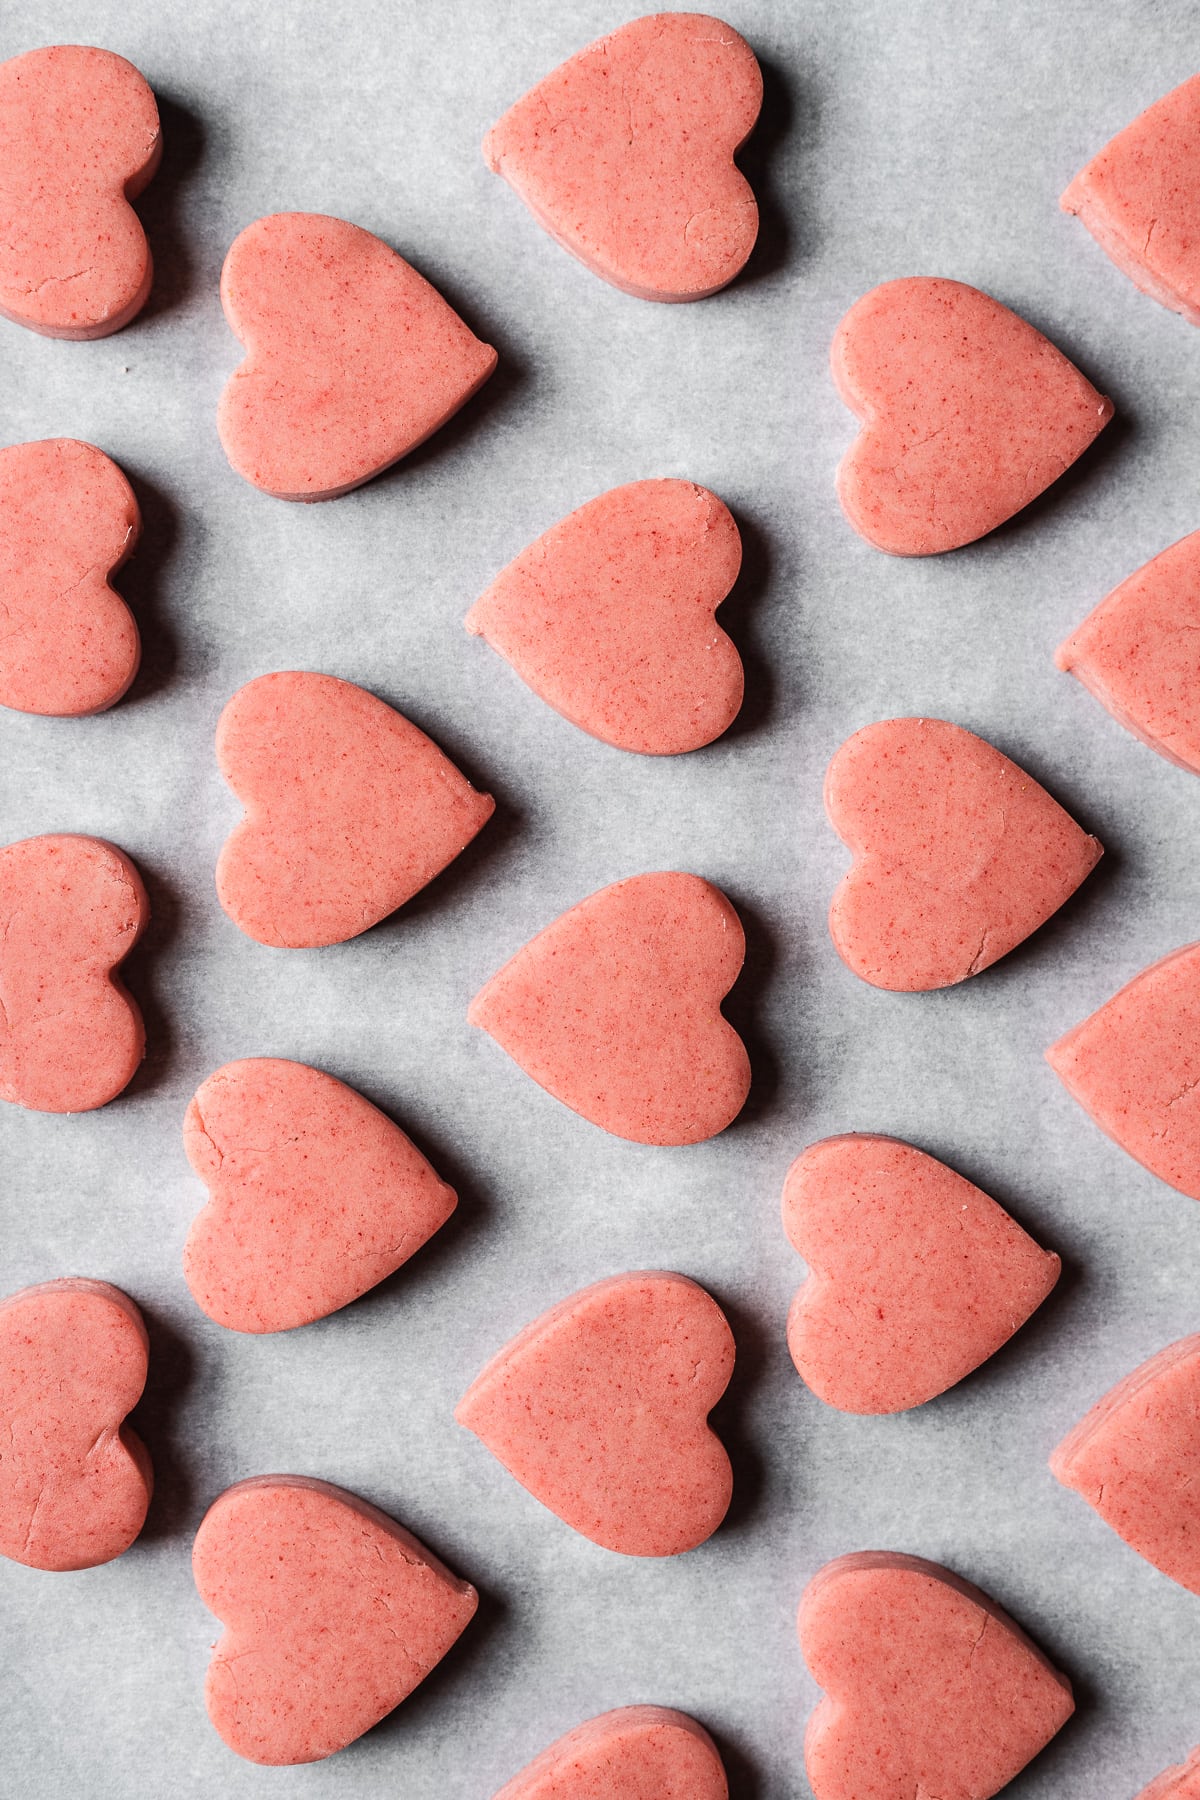 Rows of unbaked pink heart shaped cookies on a white parchment surface.